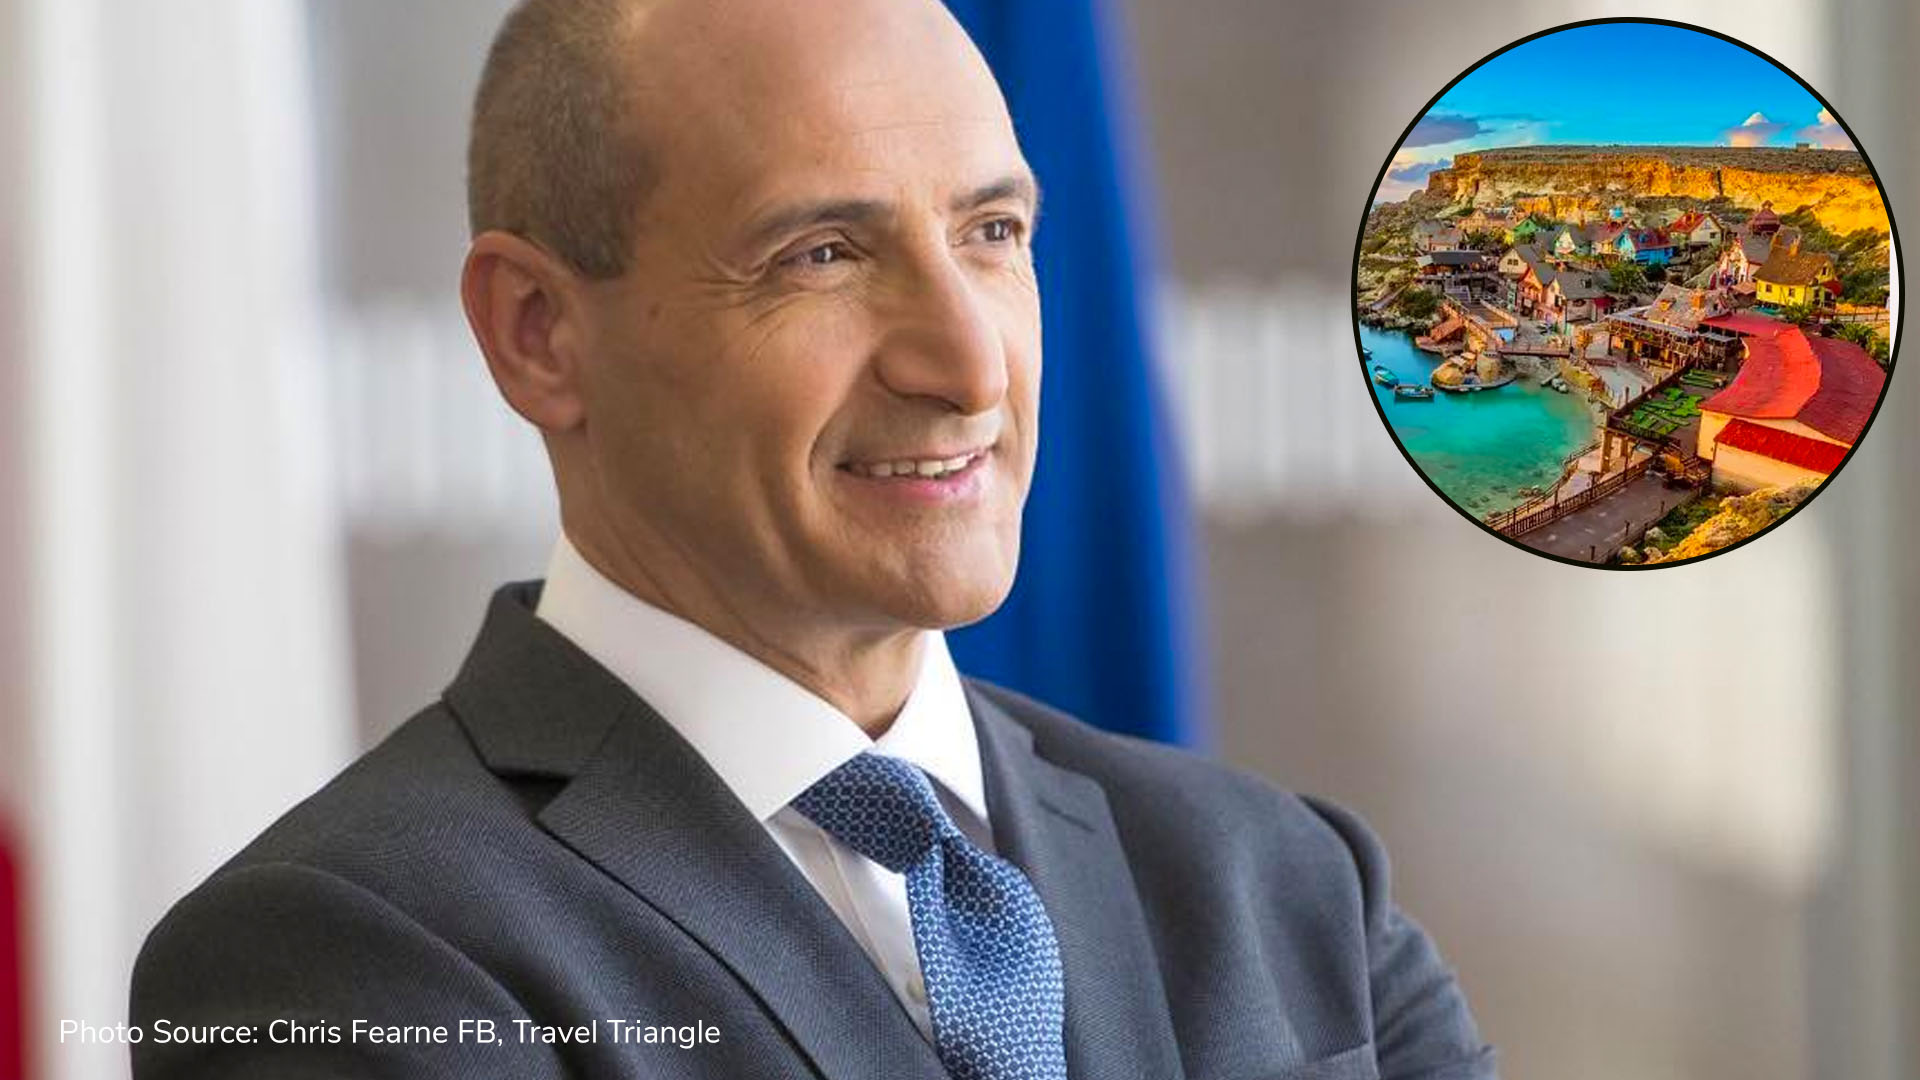 Chris Fearne says Malta will be one of the safest travel spots in summer